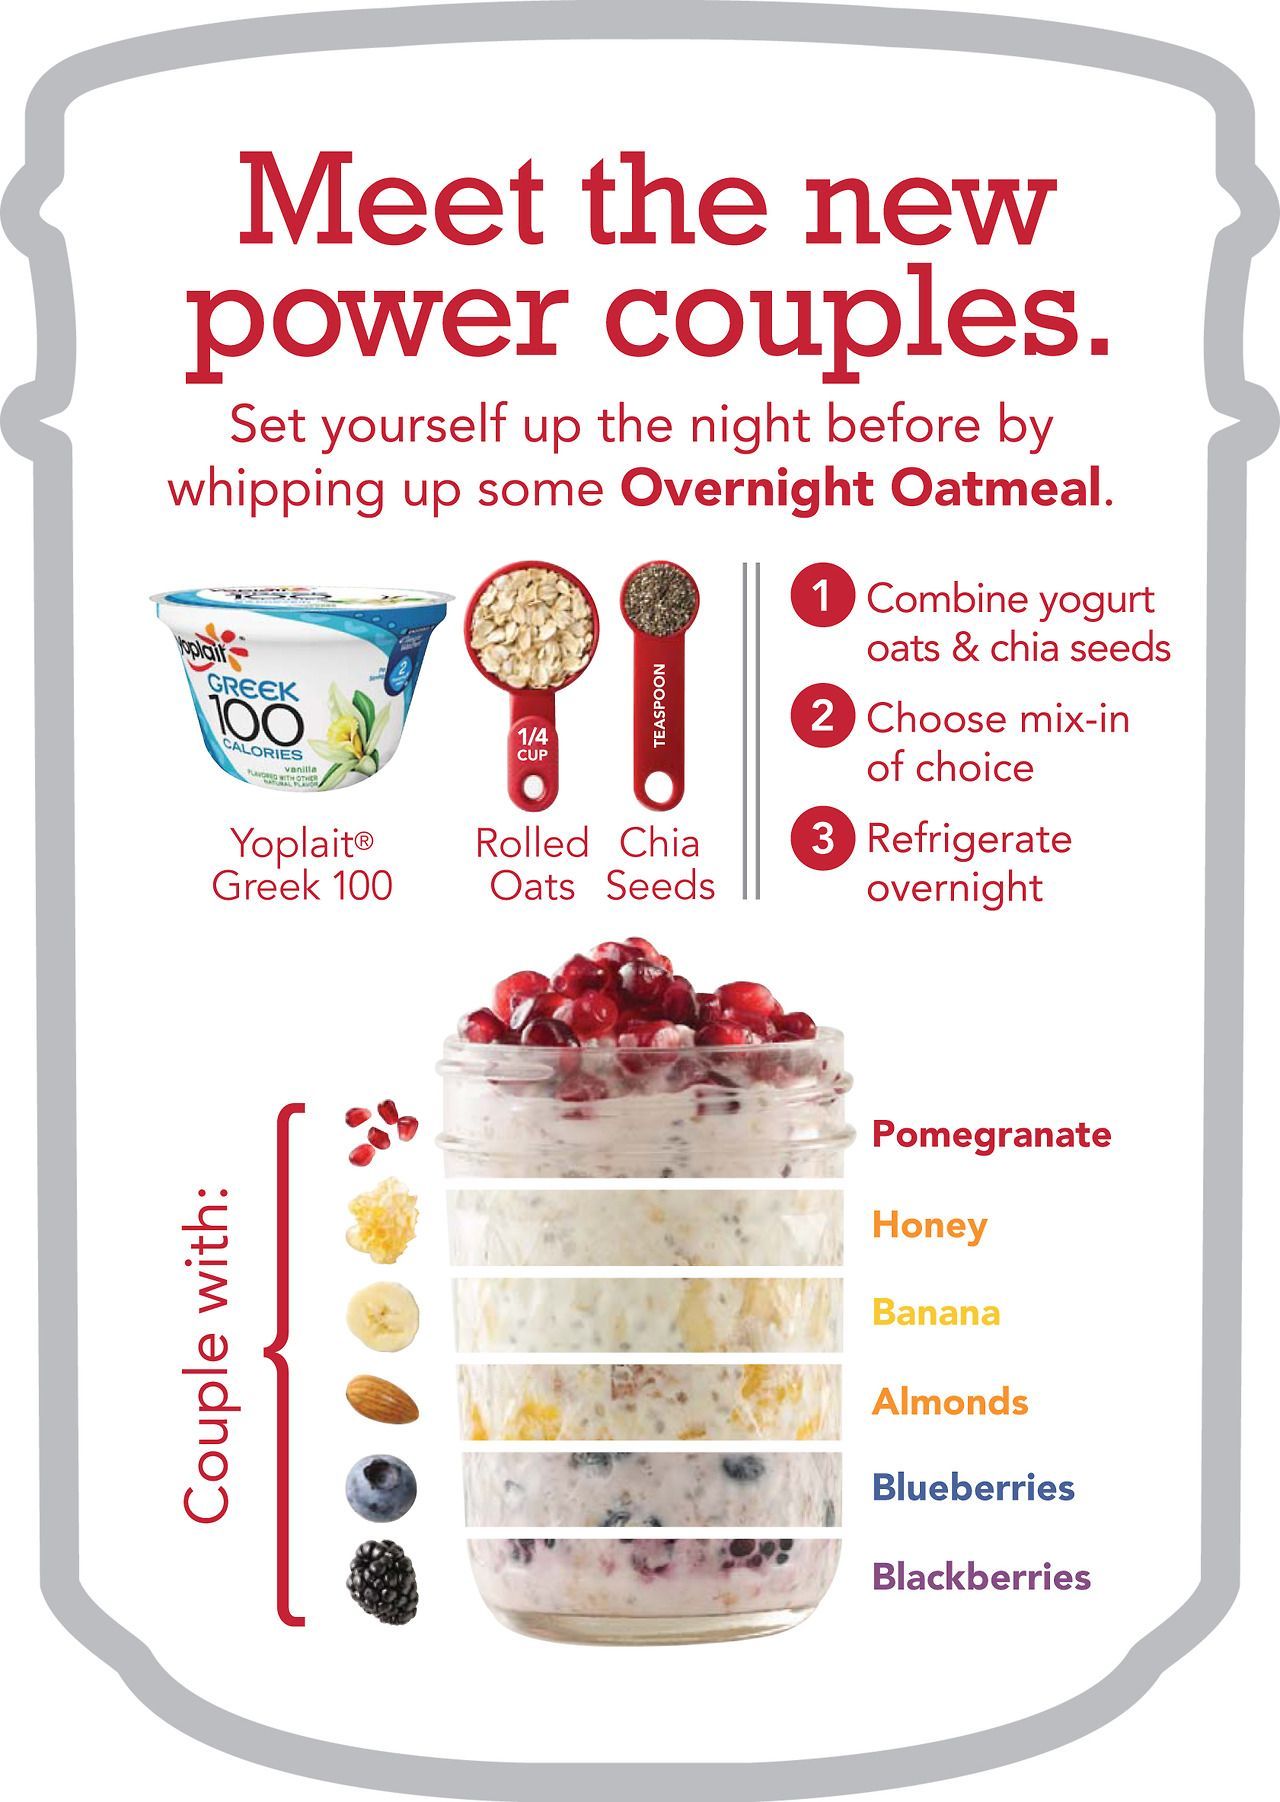 Greek yogurt, chia seeds, rolled oats, and any mix-ins of your choice combined t